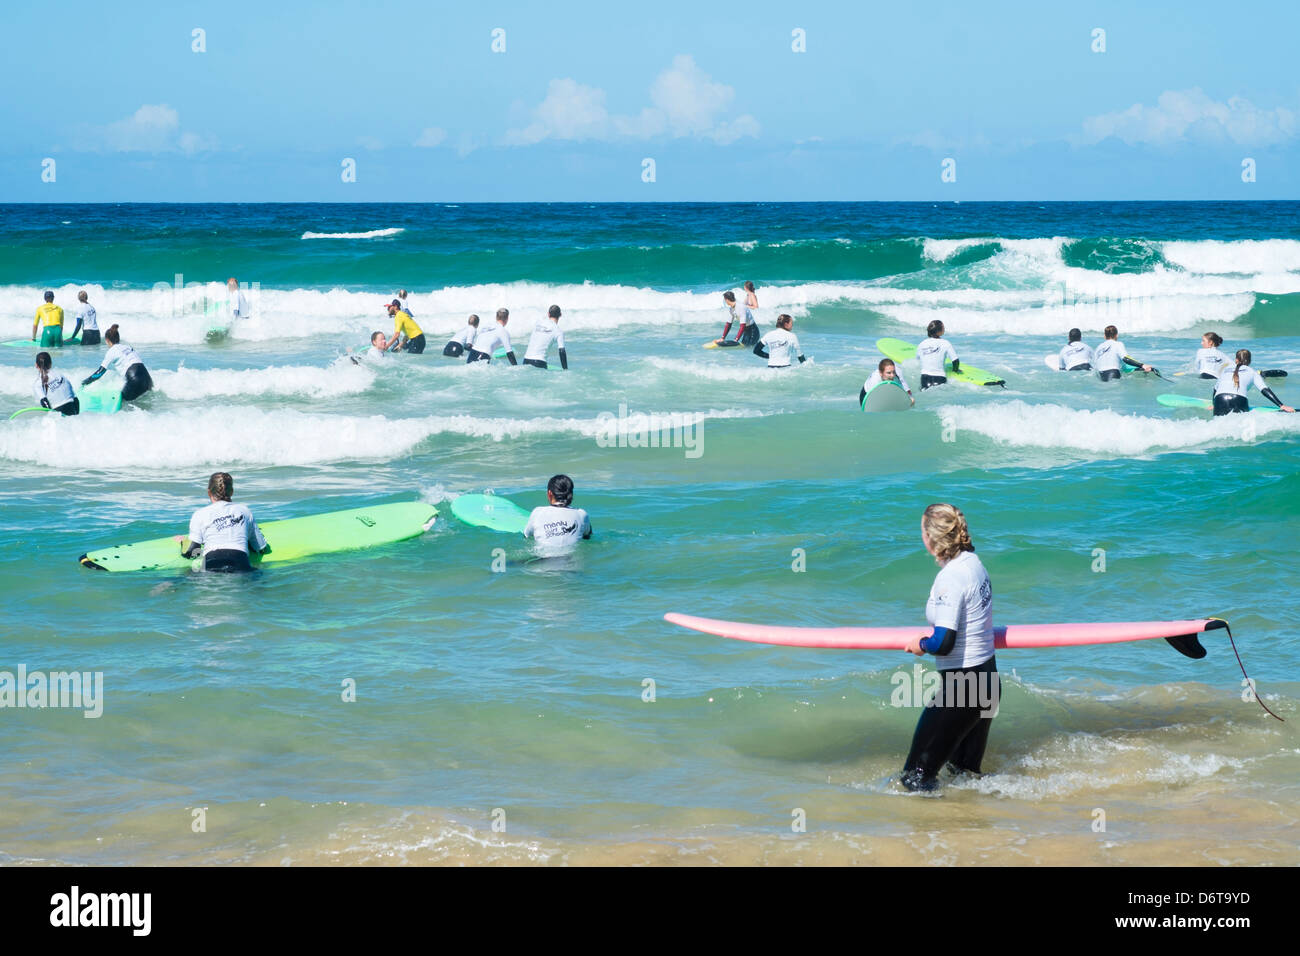 Busy surfing school in the sea at Manly Beach in Australia Stock Photo